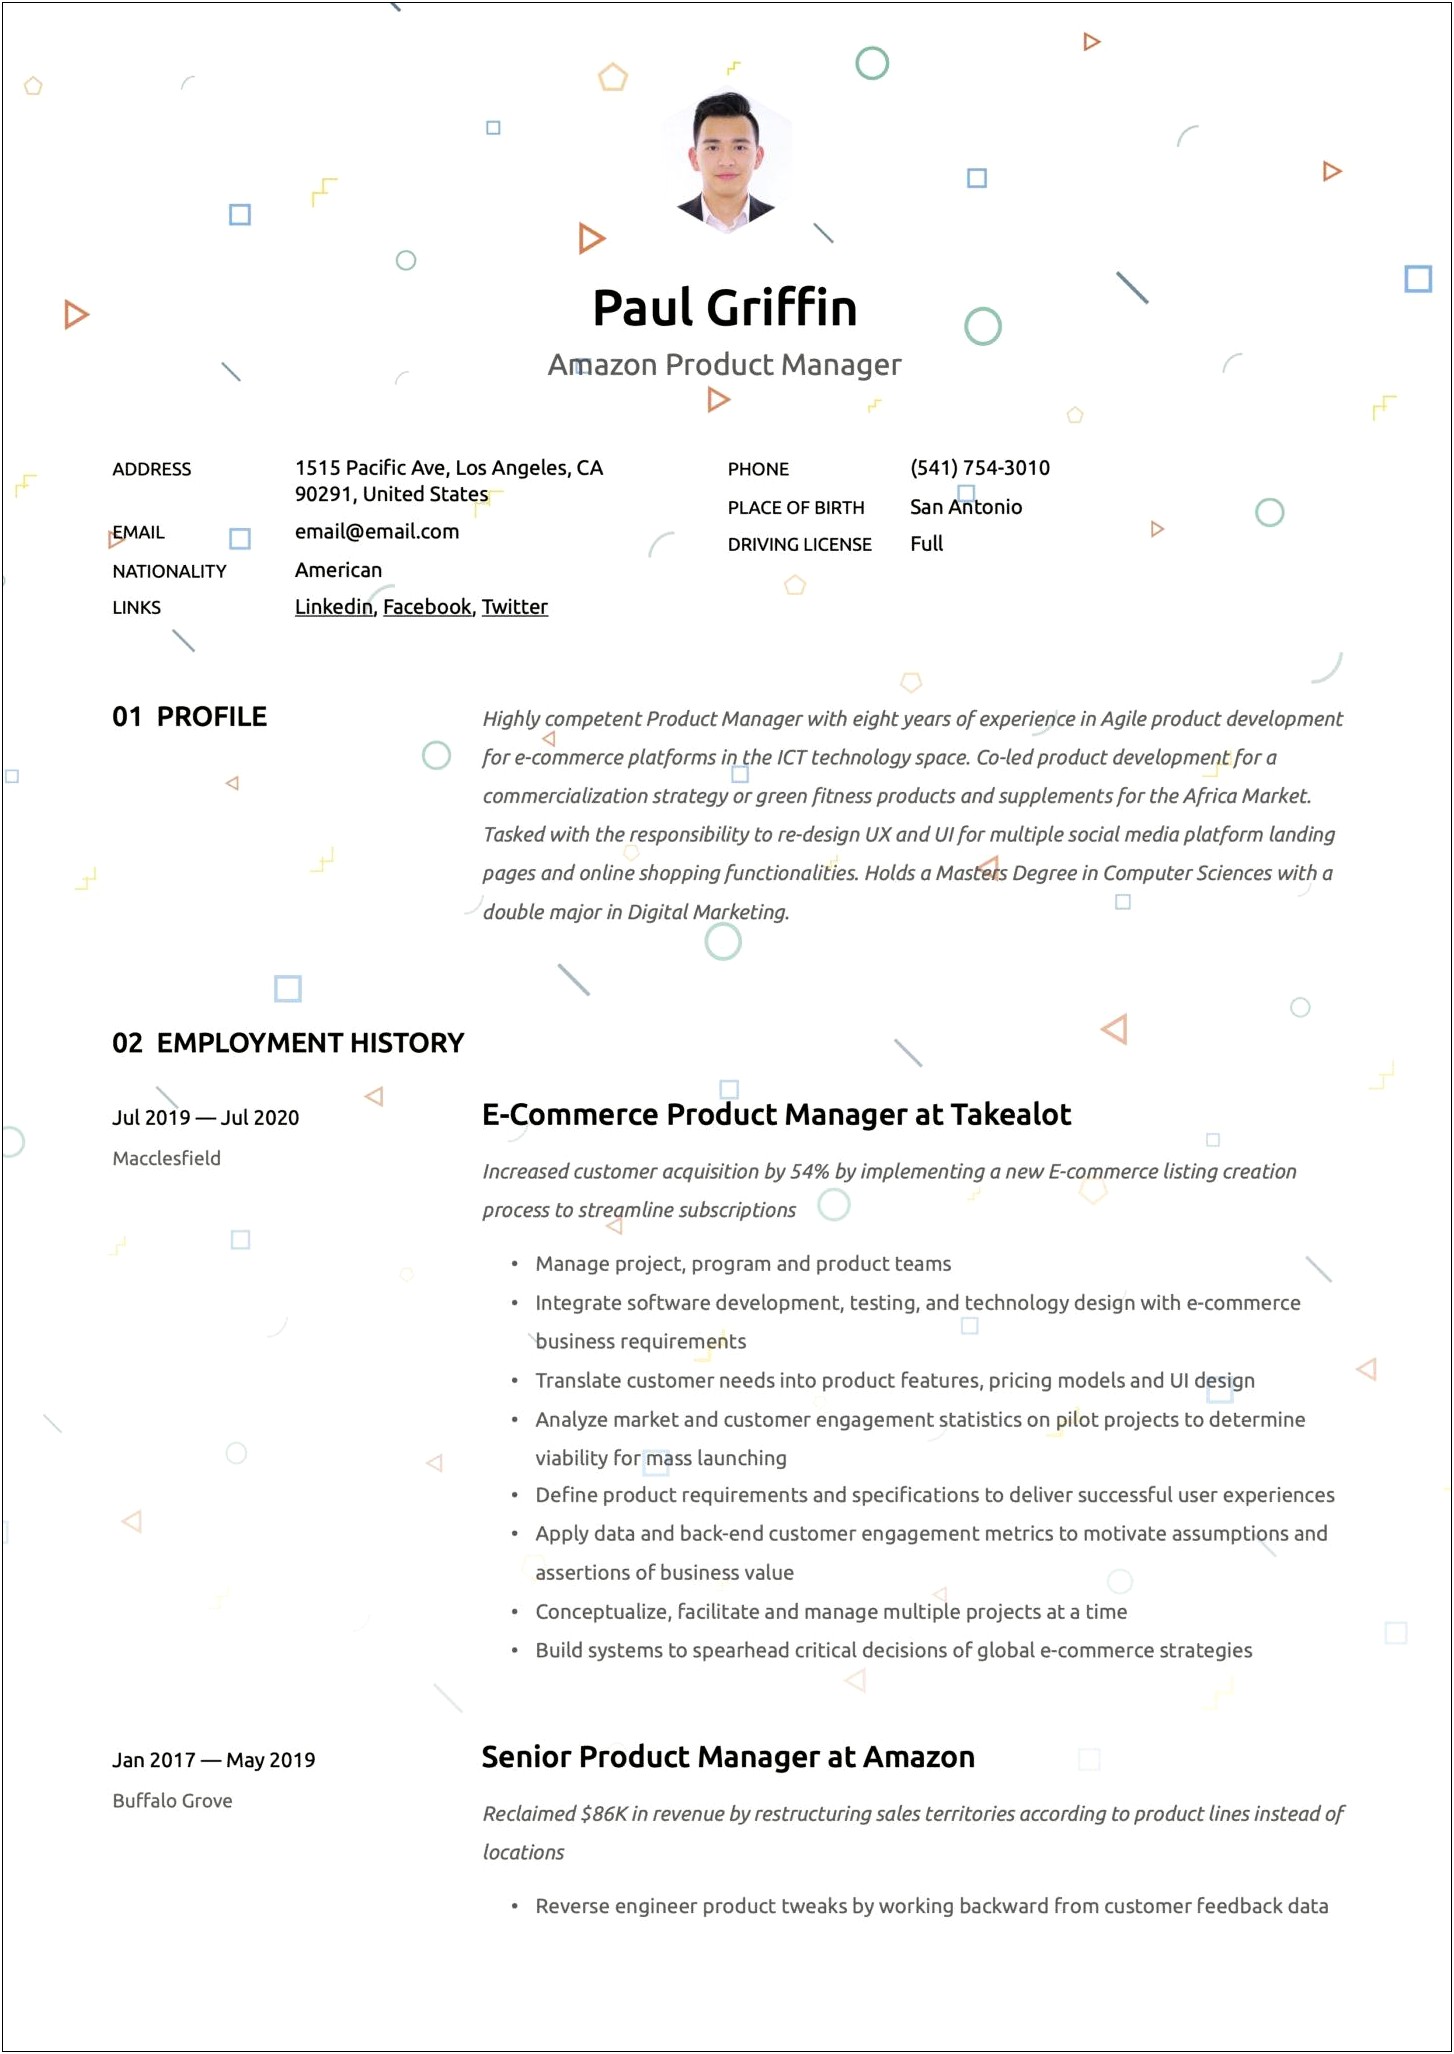 Supply Chain Senior Manager Resume In India Amazon